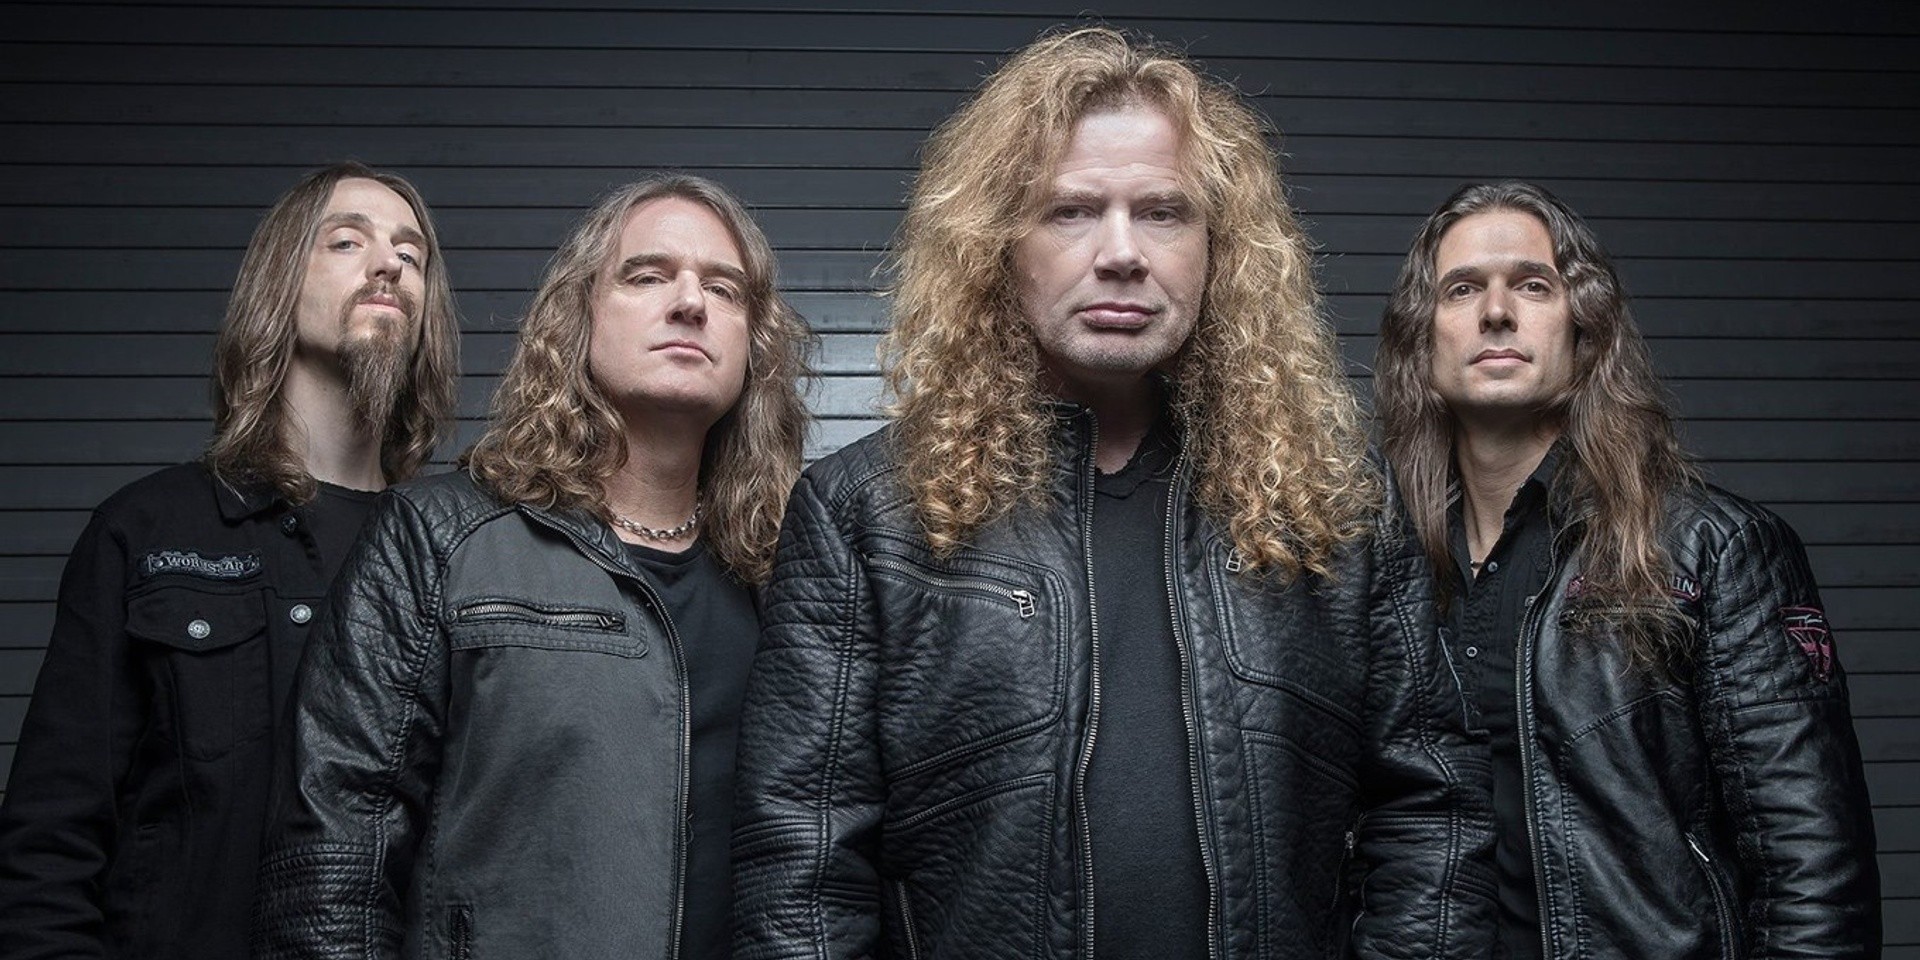 Megadeth's David Ellefson alludes to band's album being pushed back to 2020